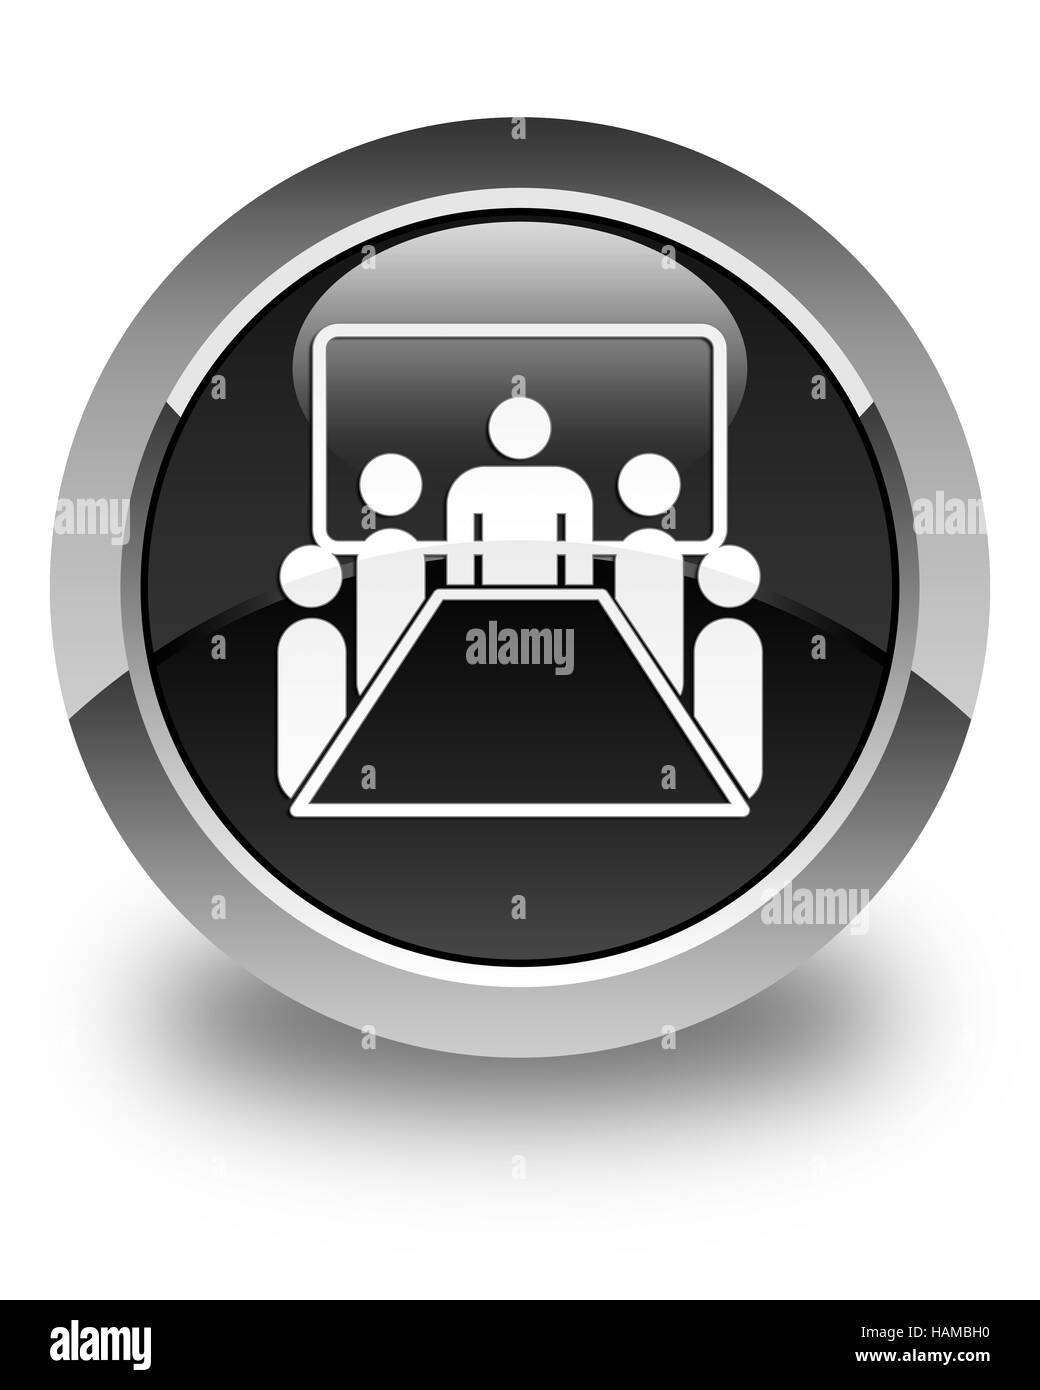 Meeting room icon isolated on glossy black round button abstract illustration Stock Photo